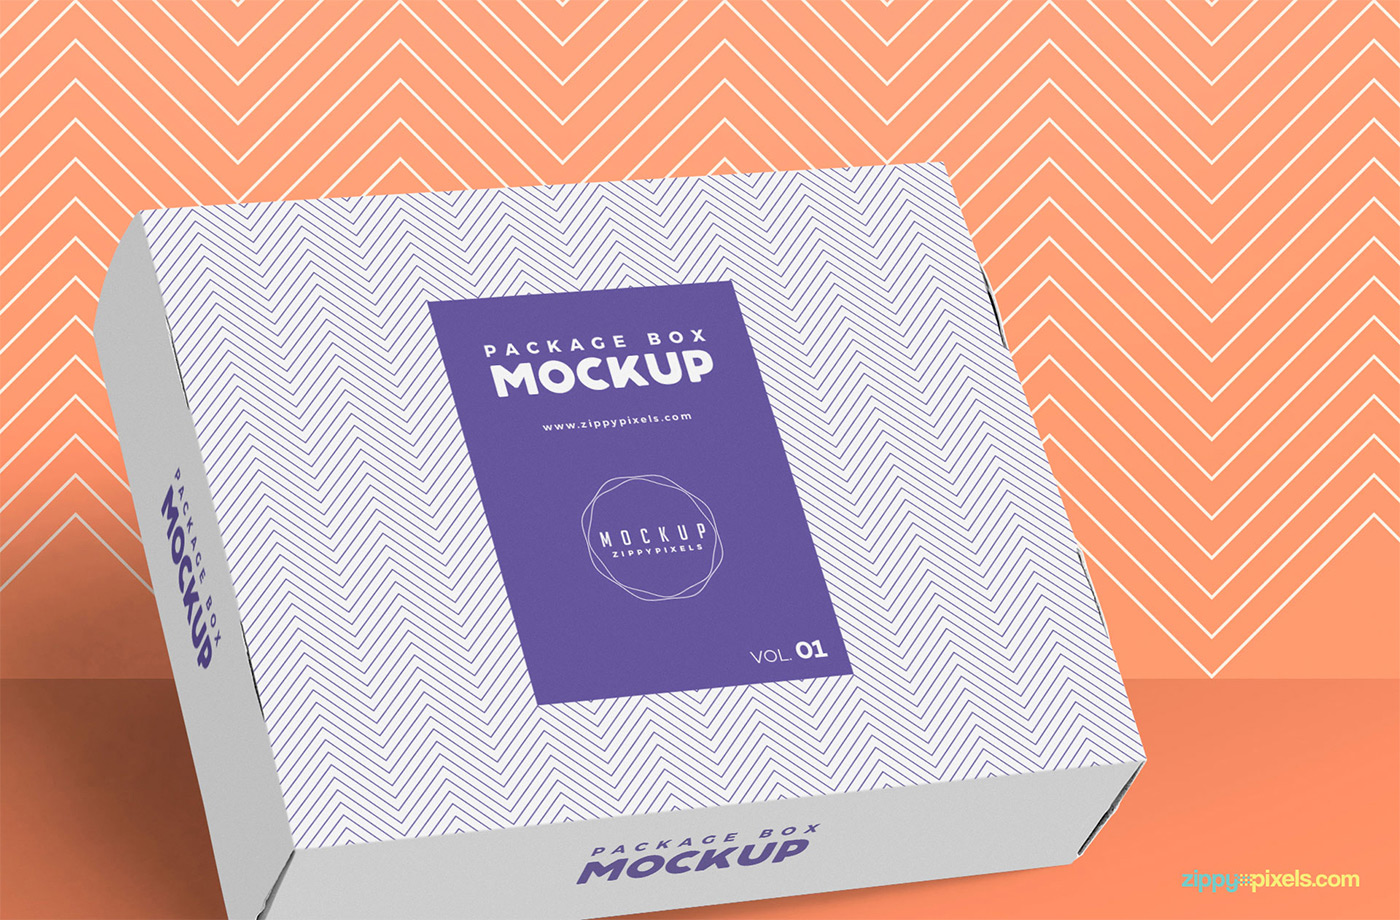 Free and Elegant Box Packaging Mockup by ZippyPixels on Dribbble